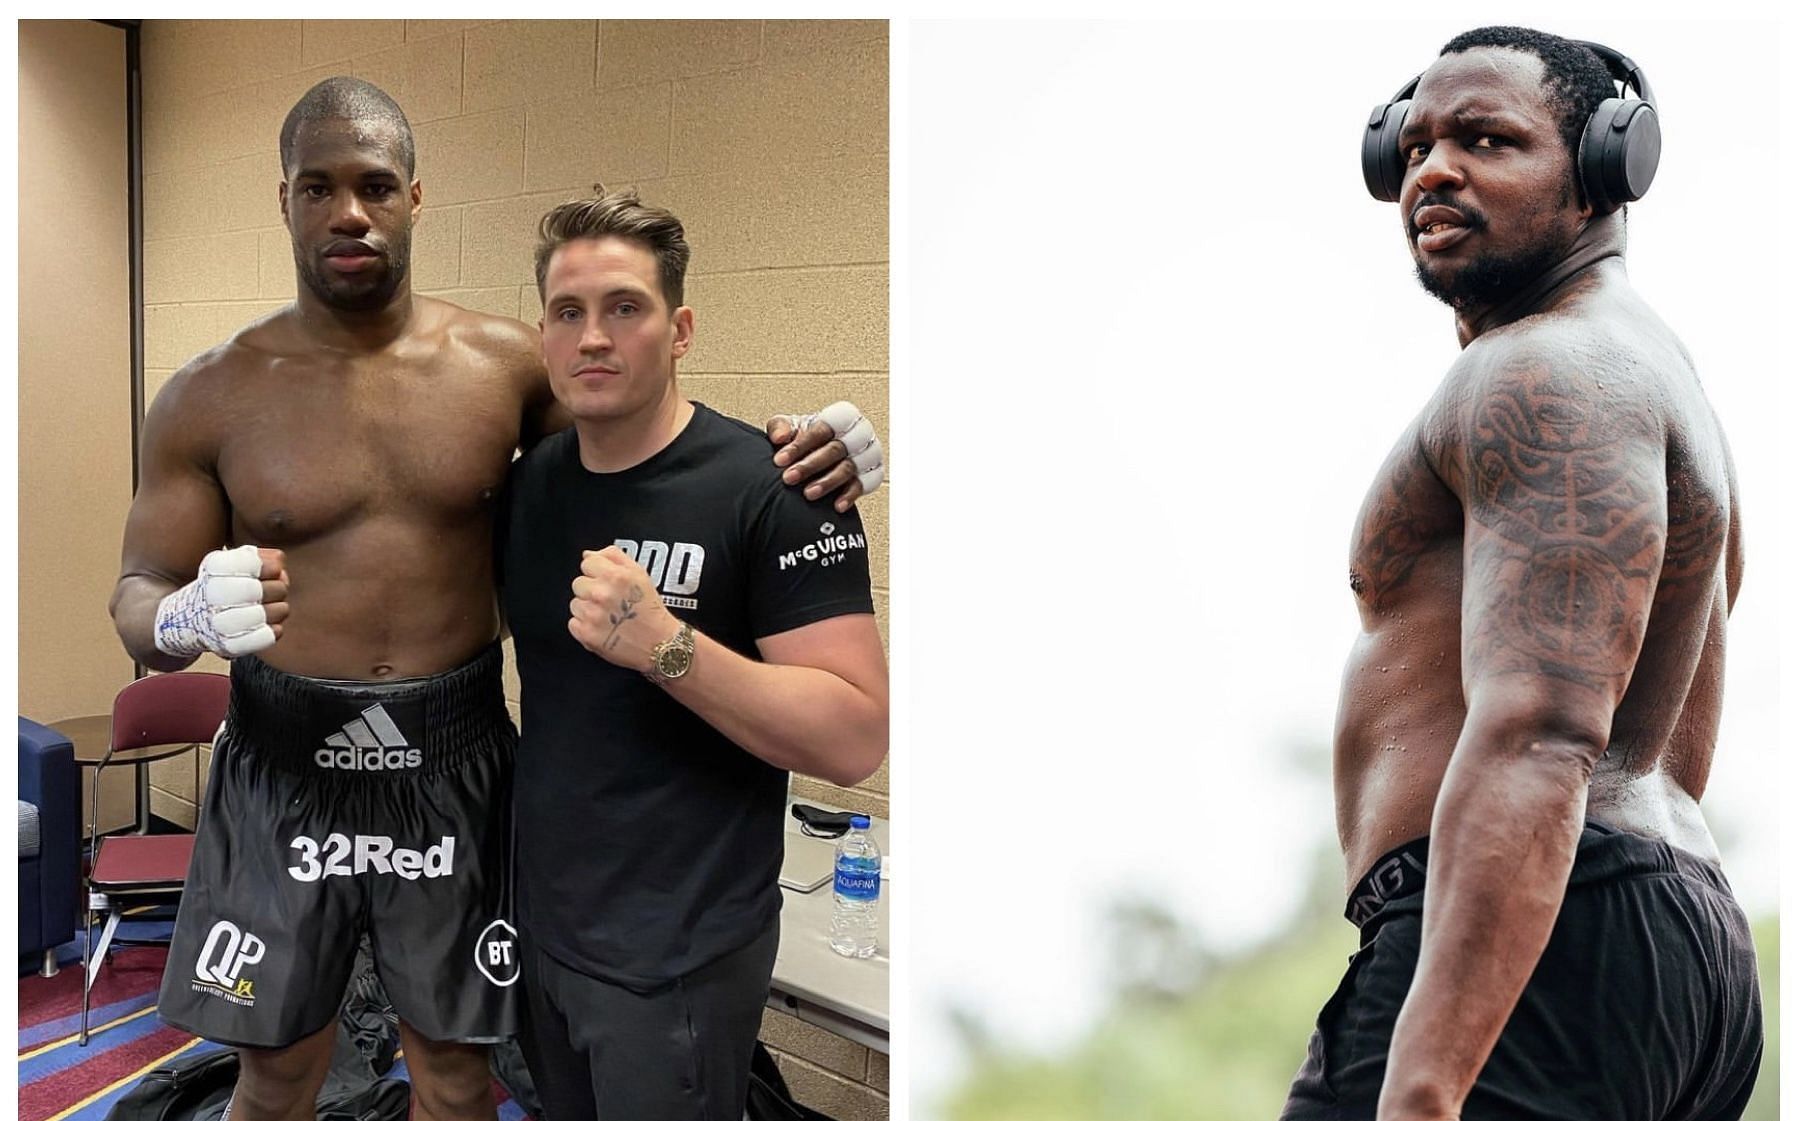 Daniel Dubois (left) and Shane McGuigan (middle), Dillian Whyte (right) - Images via @shanemcguigan and @dillianwhyte on Instagram